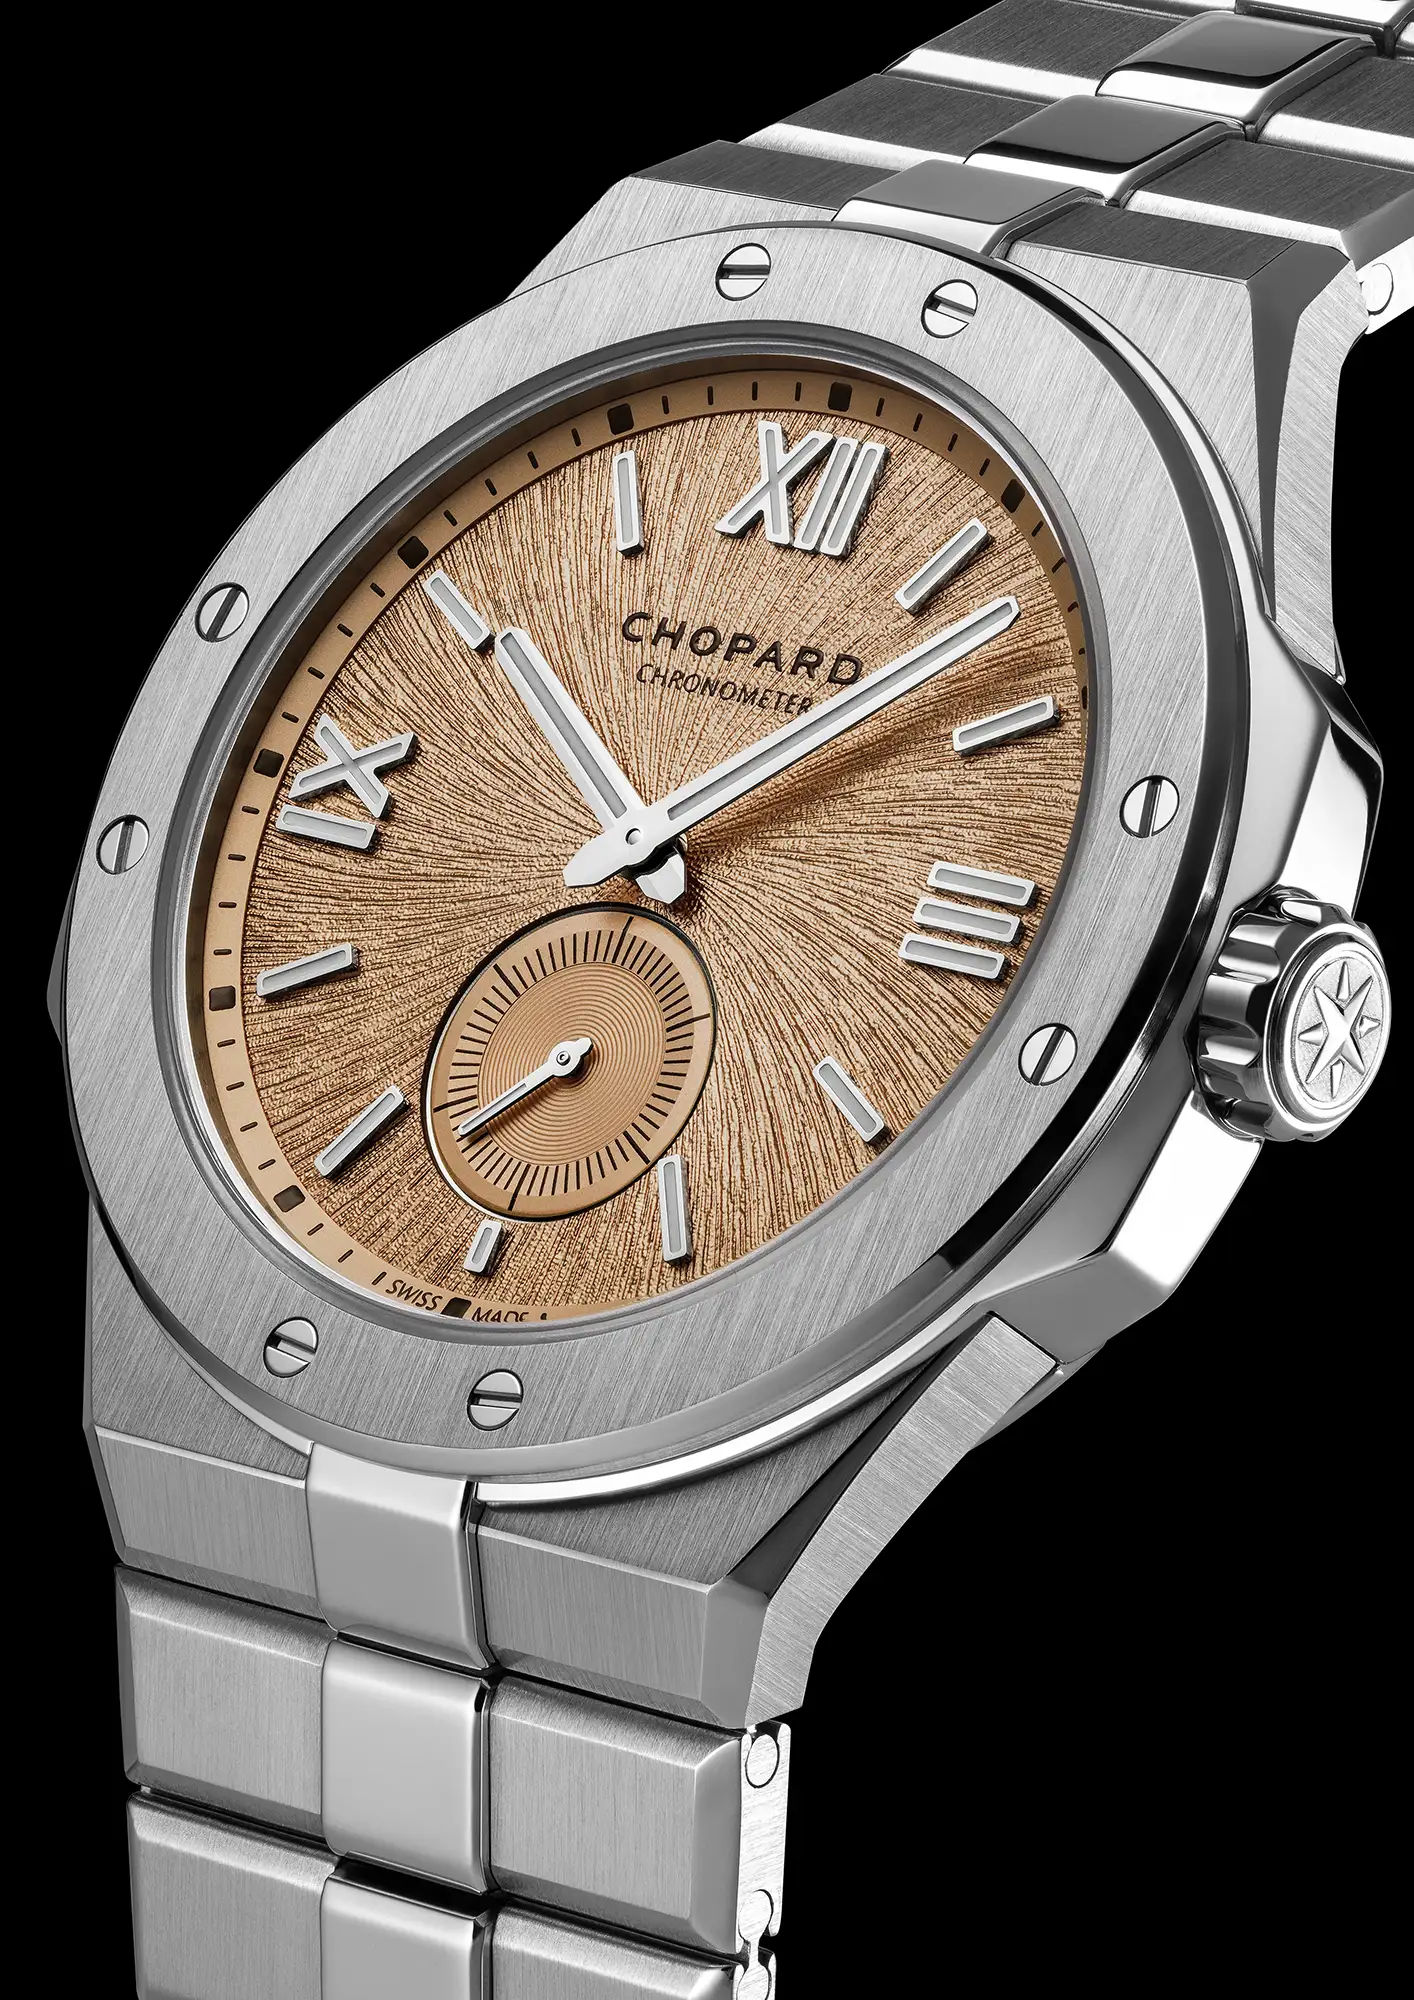 Watches and Wonders 2023: The Chopard Alpine Eagle with Small Seconds